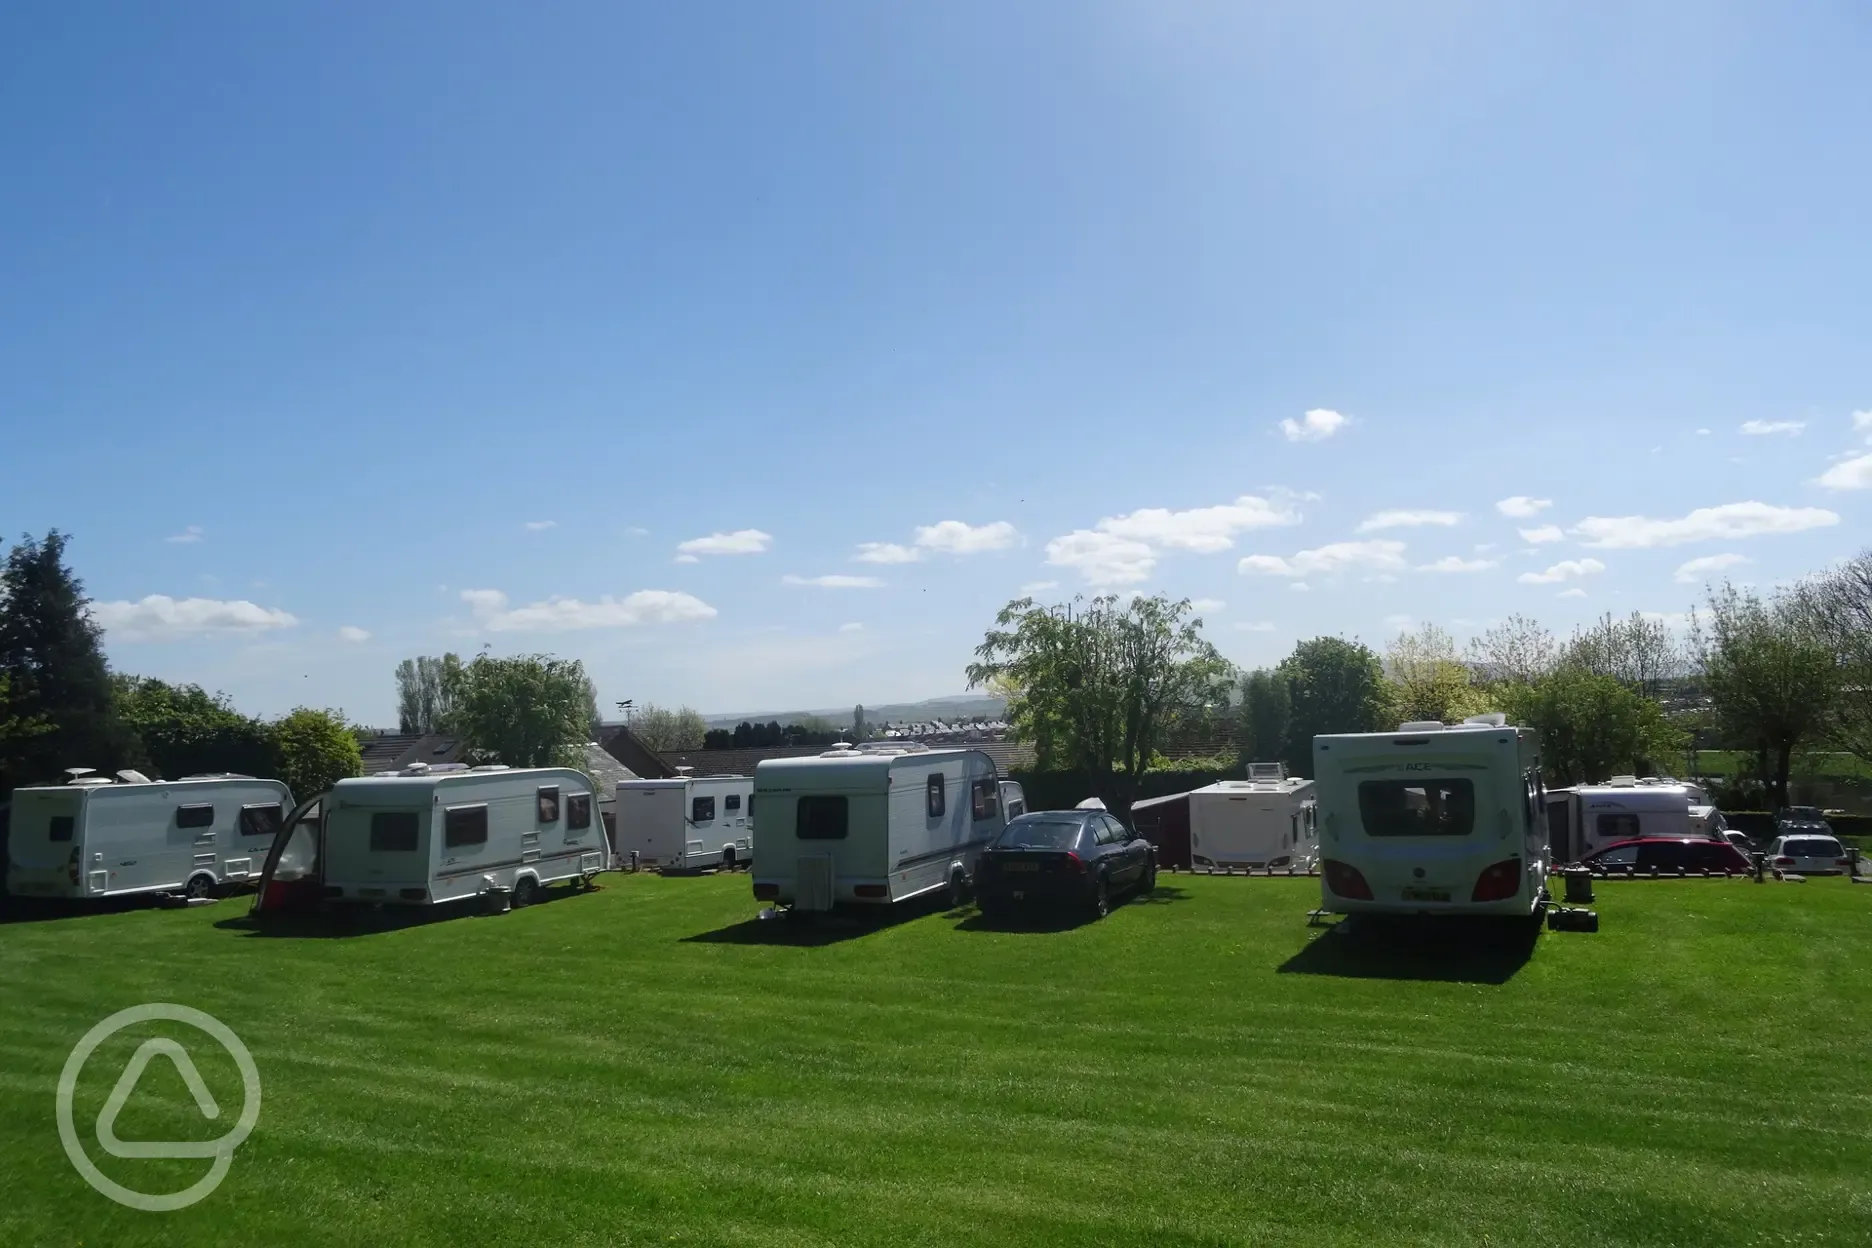 View of the caravan park from the back